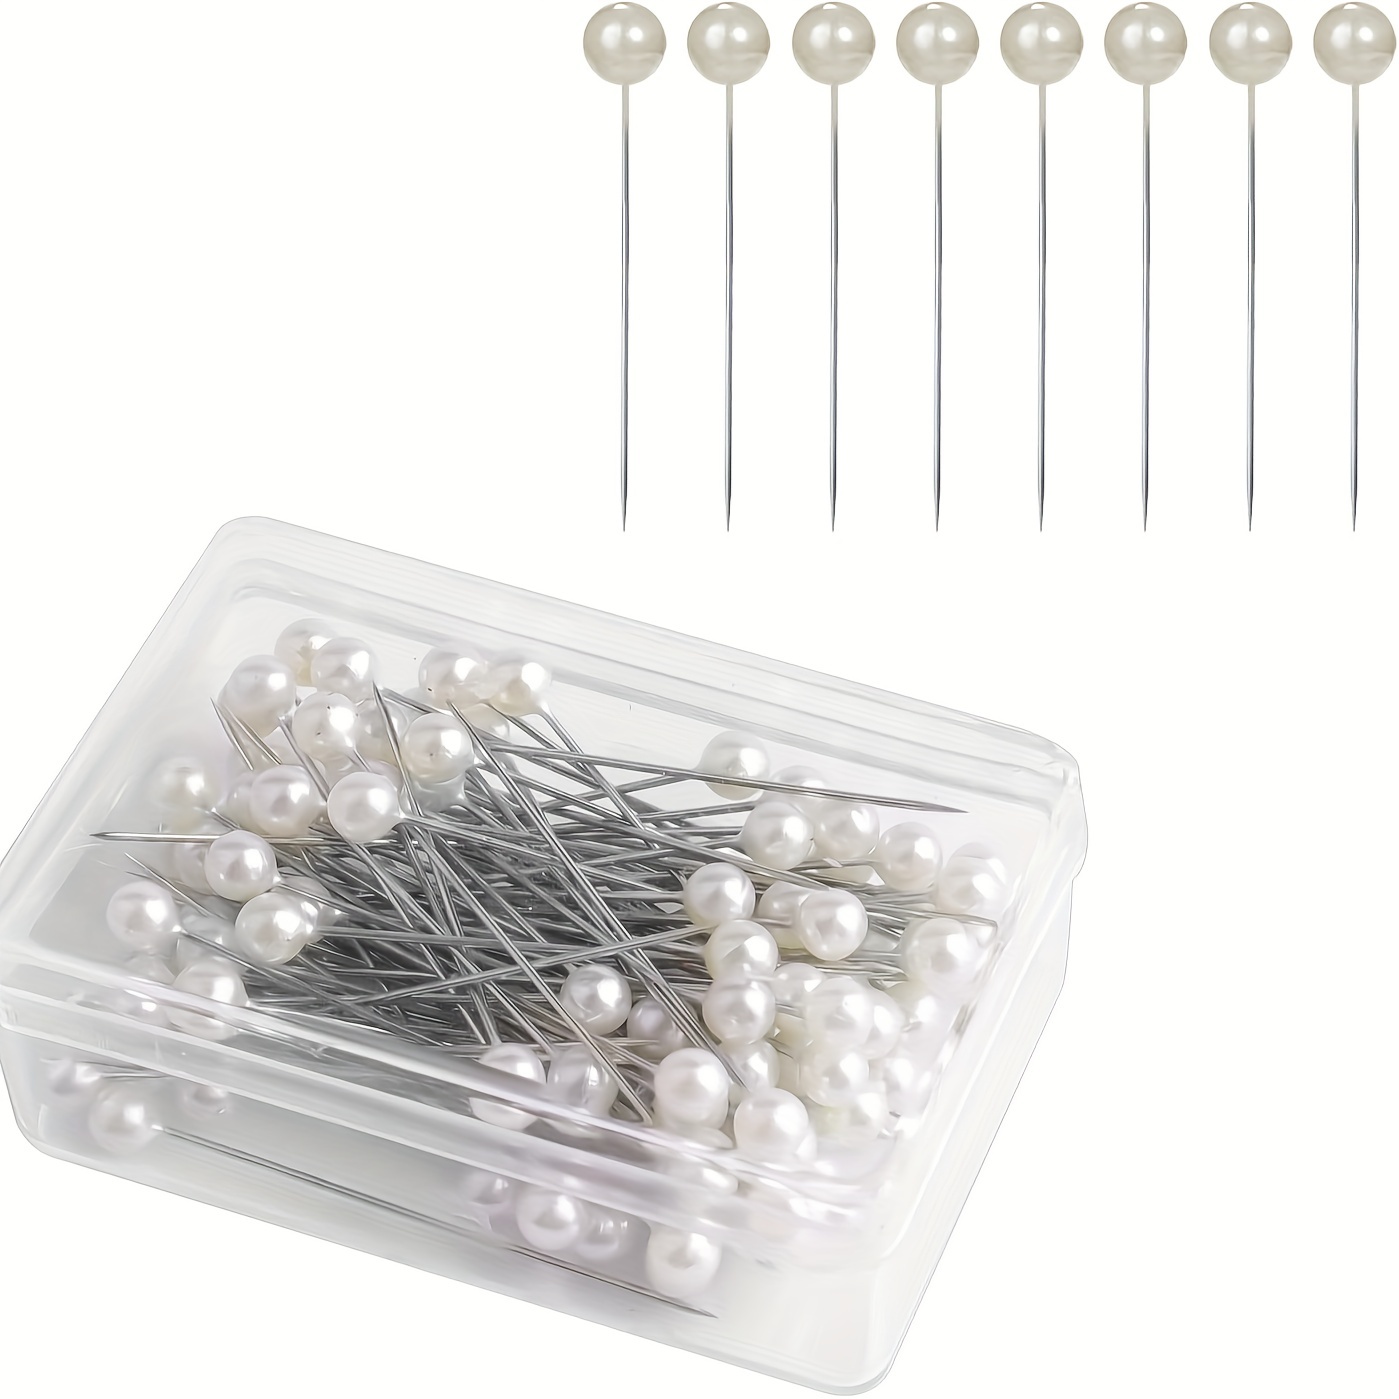 Flower Pins for Bouquet, Stitching Needles - Straight Pins for DIY Sewing  Craft Wedding Floral Dressmaking Decorations Levabe